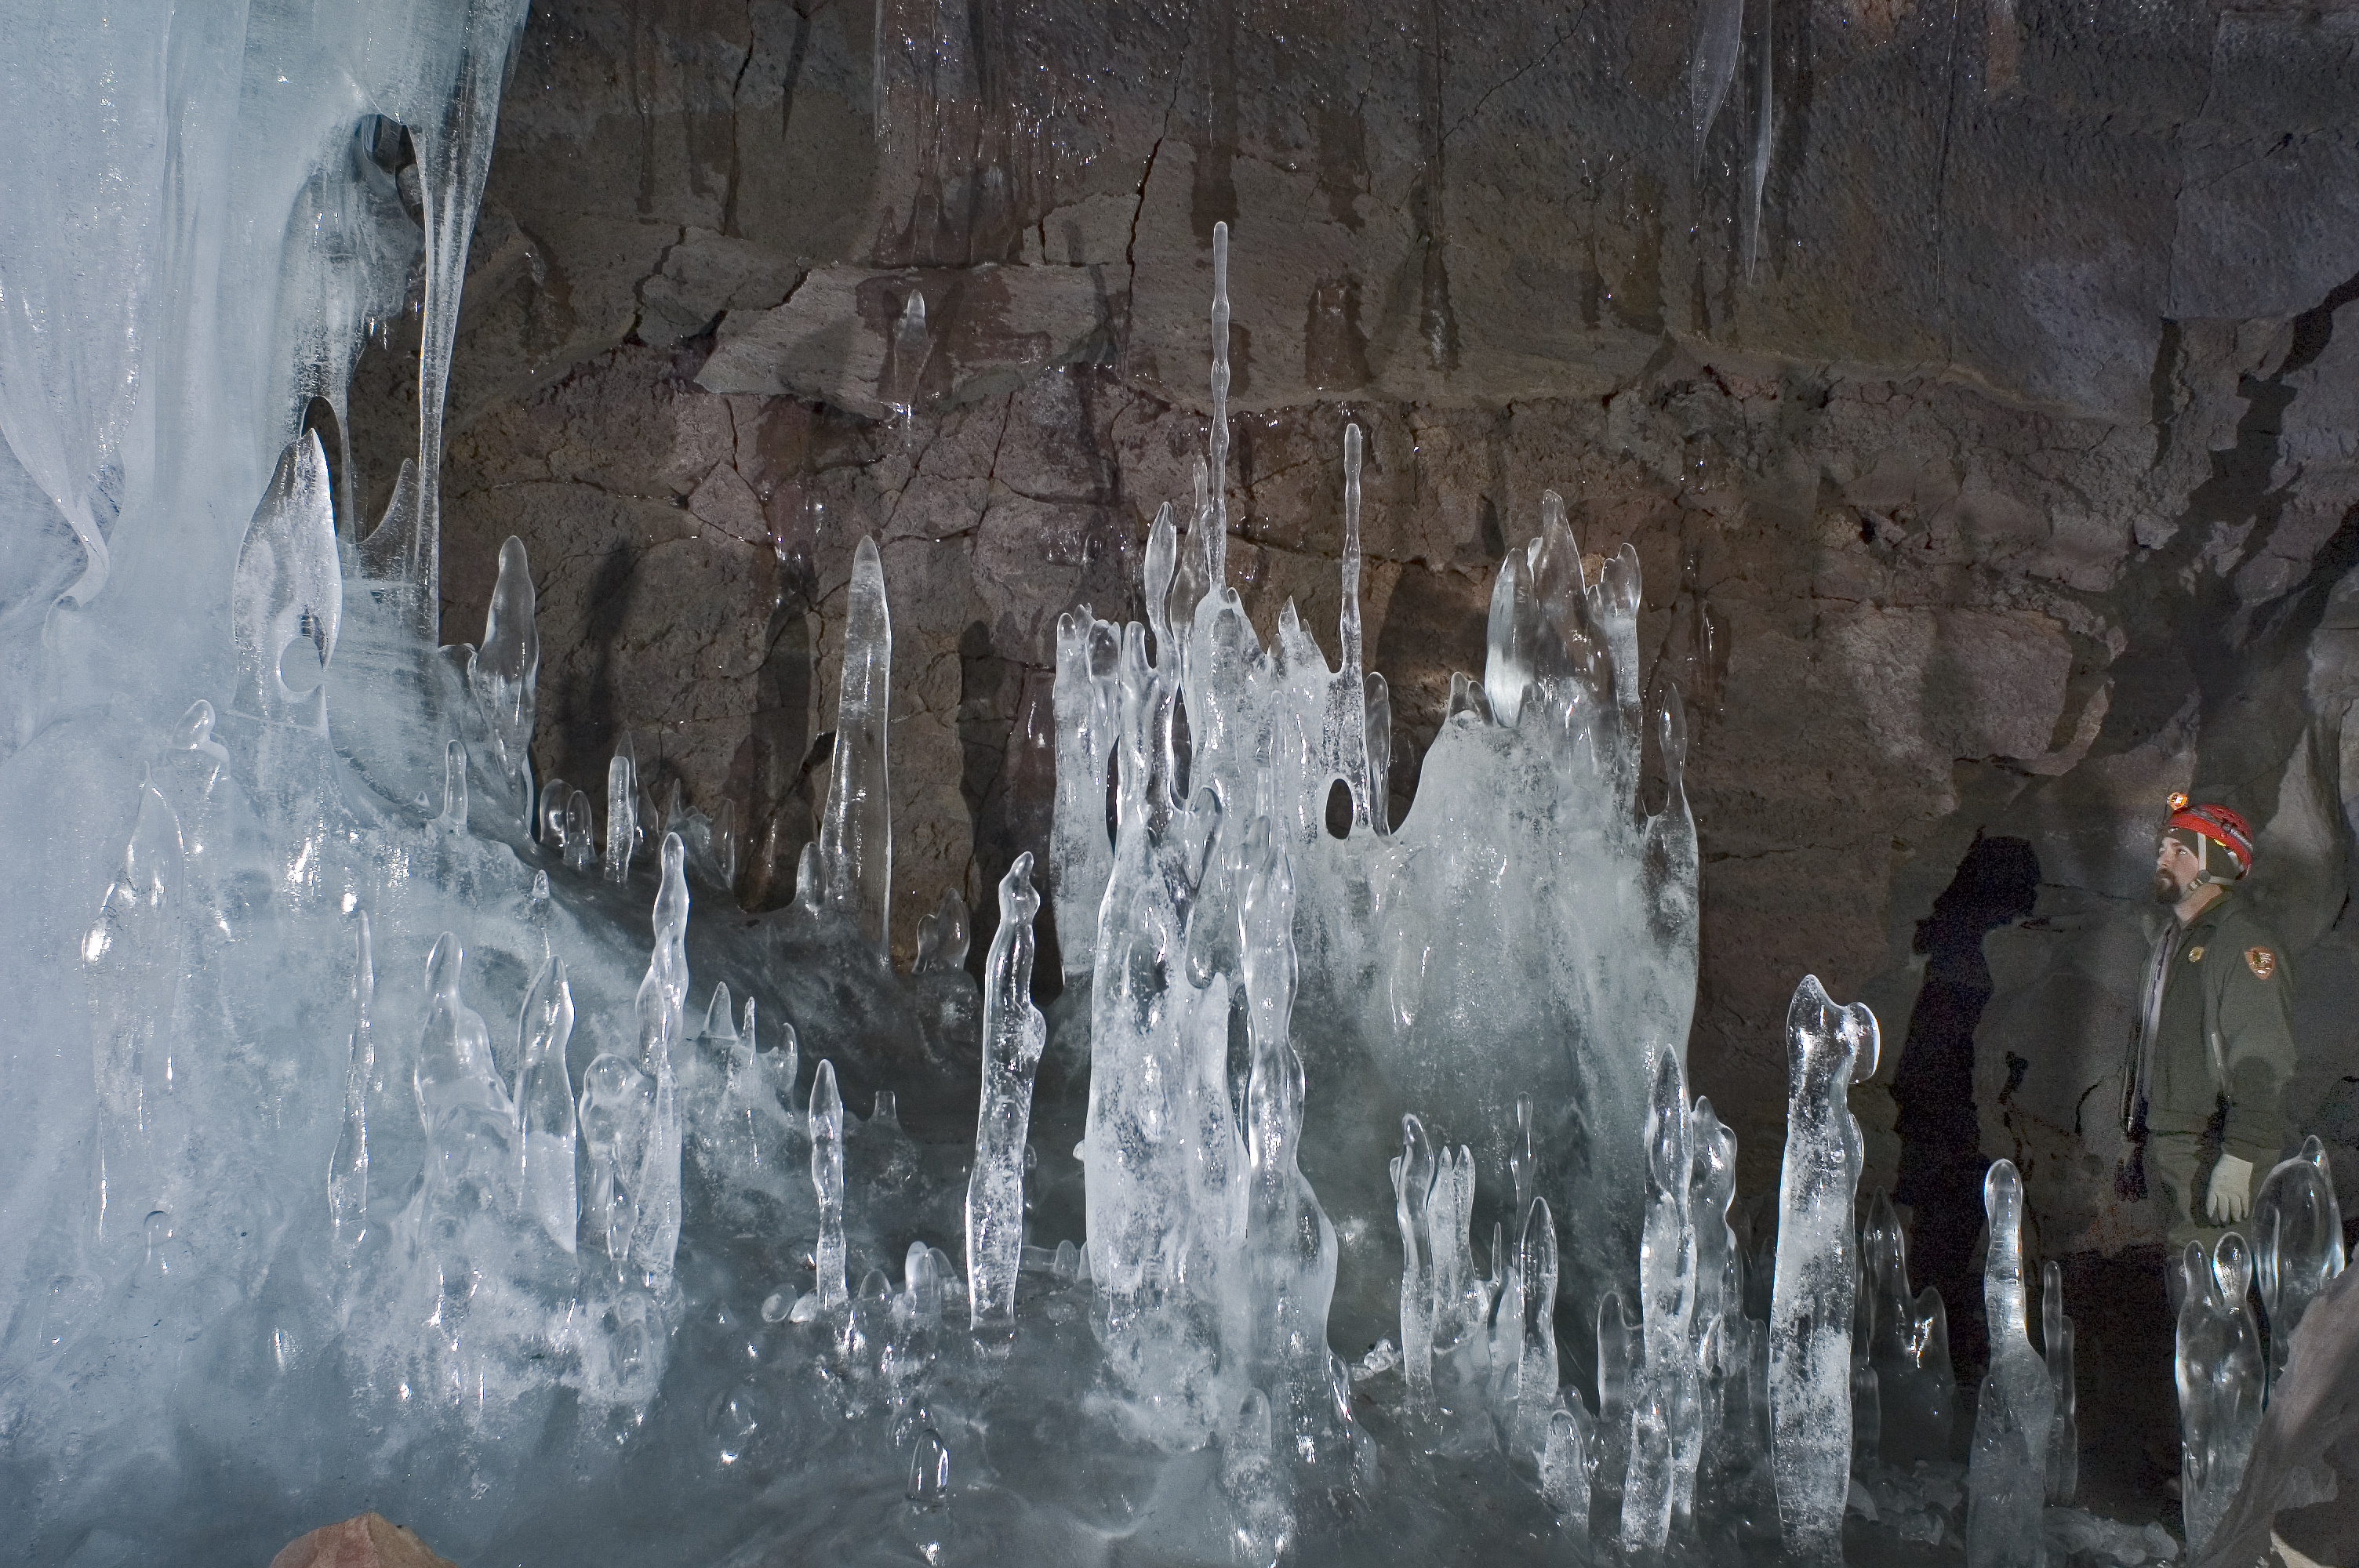 Crystal Ice Cave Tours - Lava Beds National Monument (U.S. National